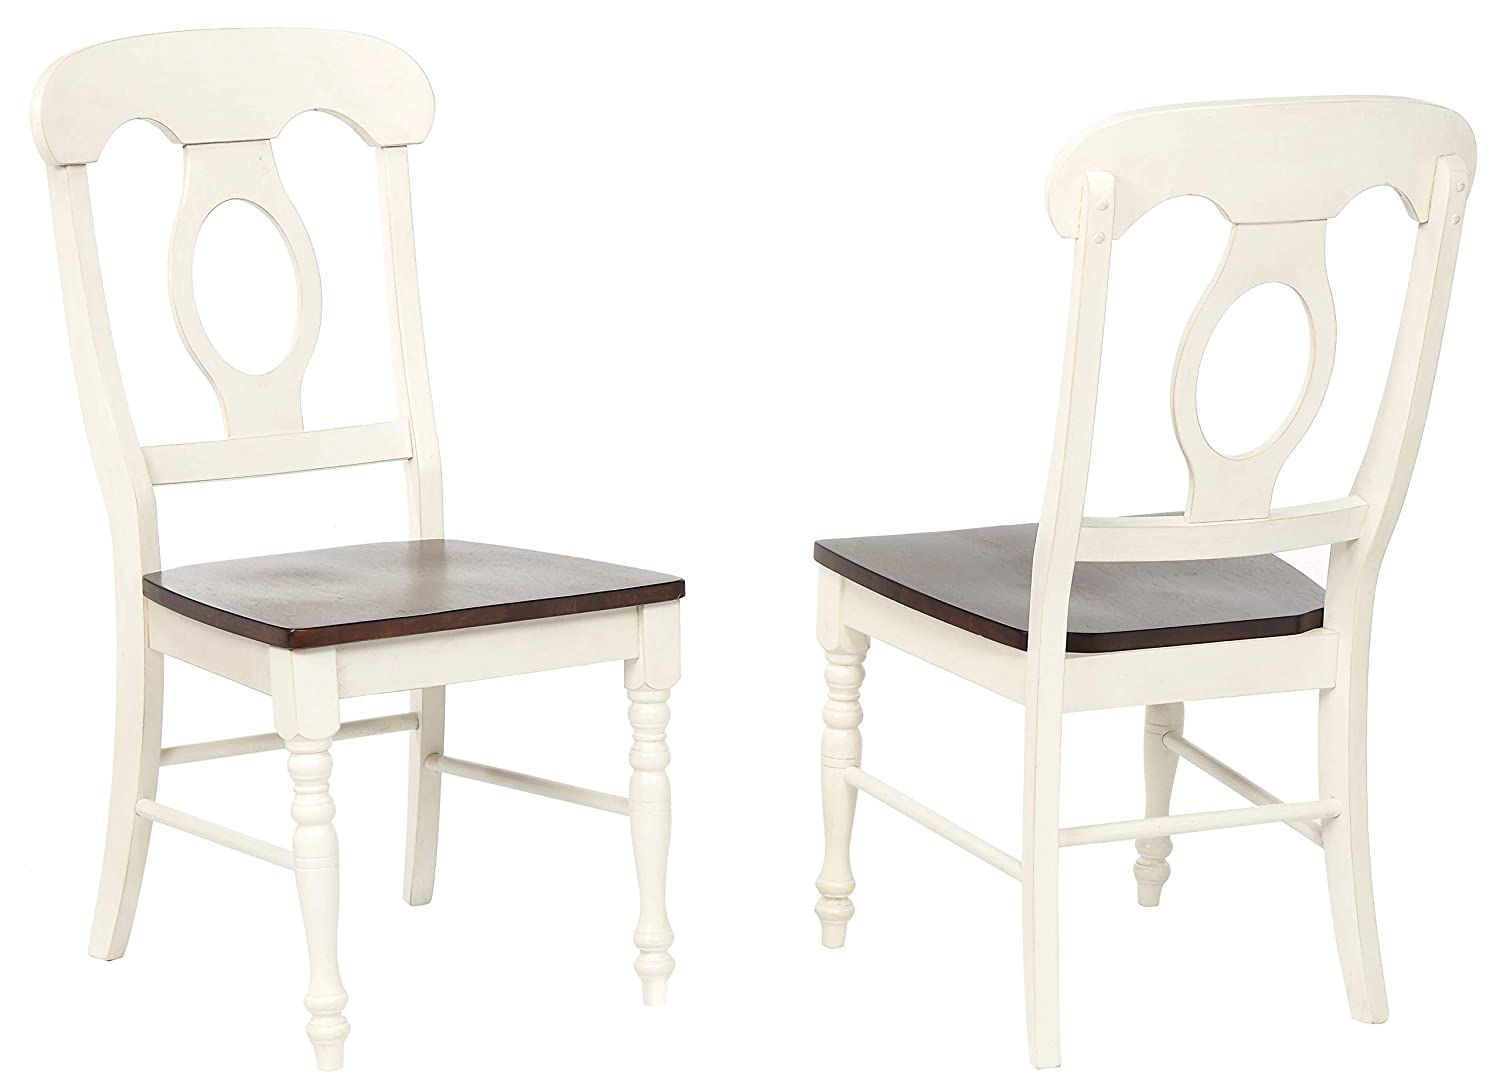 B07HRLPJBY Sunset Trading Andrews Dining Chairs, Distressed antique white with chestnut seat